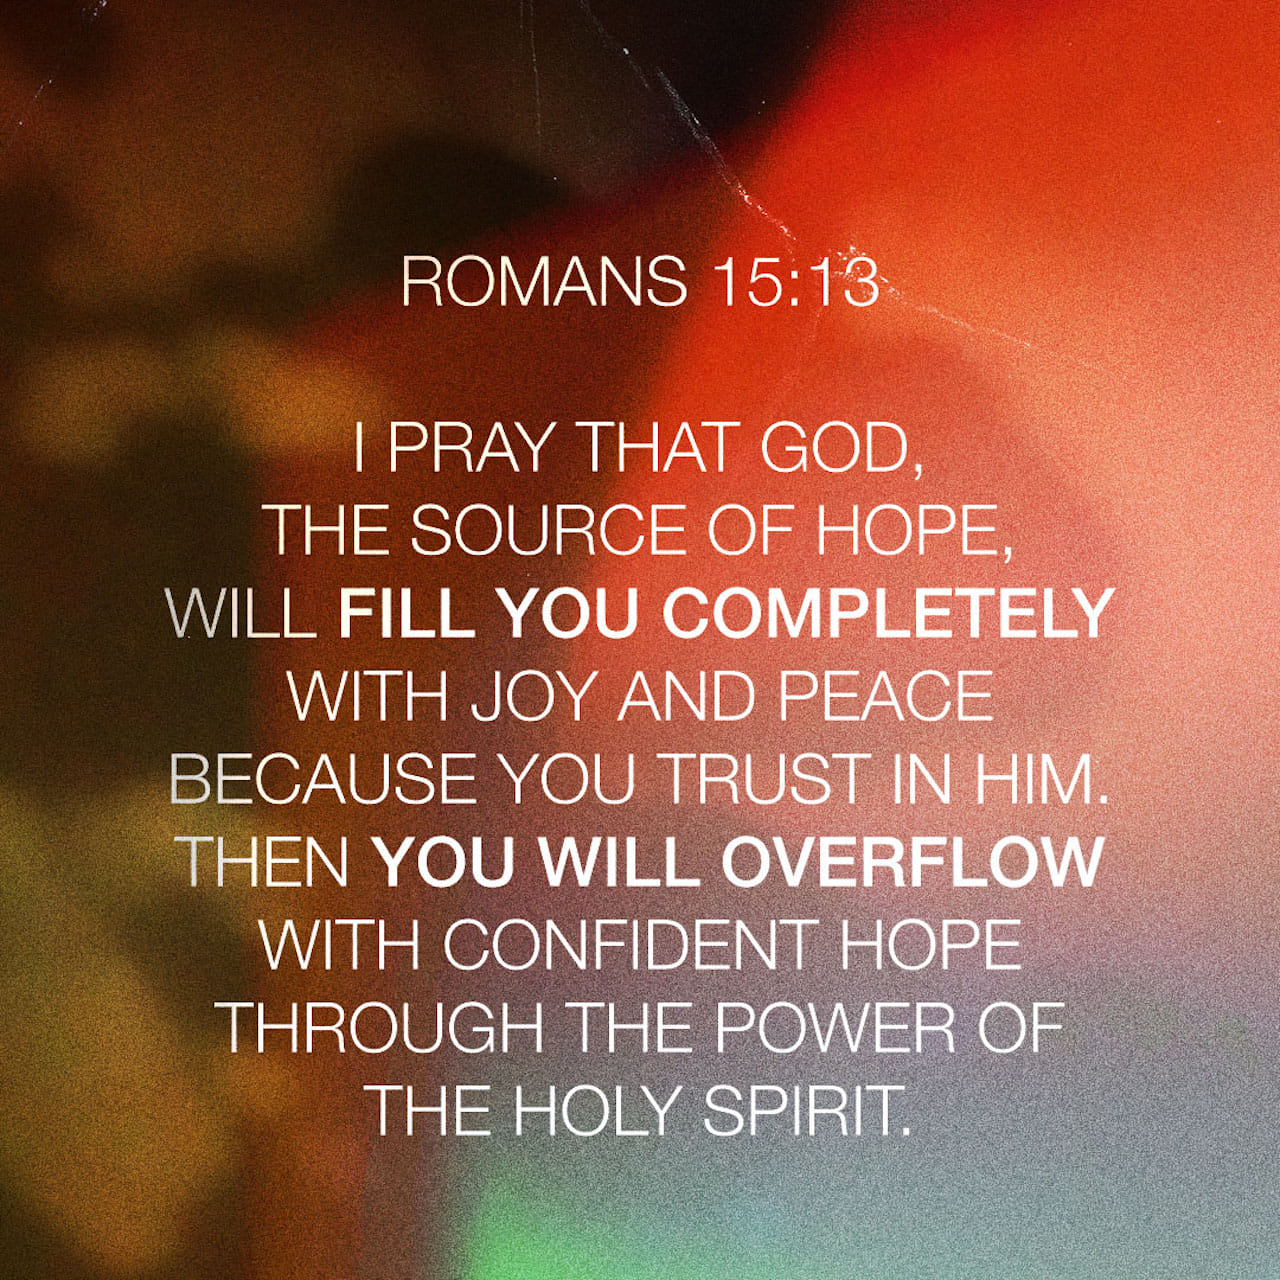 Romans 15:13 I pray that God, the source of hope, will fill you completely with joy and peace because you trust in him. Then you will overflow with confident hope through the power of the Holy Spirit. | New Living Translation (NLT) | Download The Bible App Now